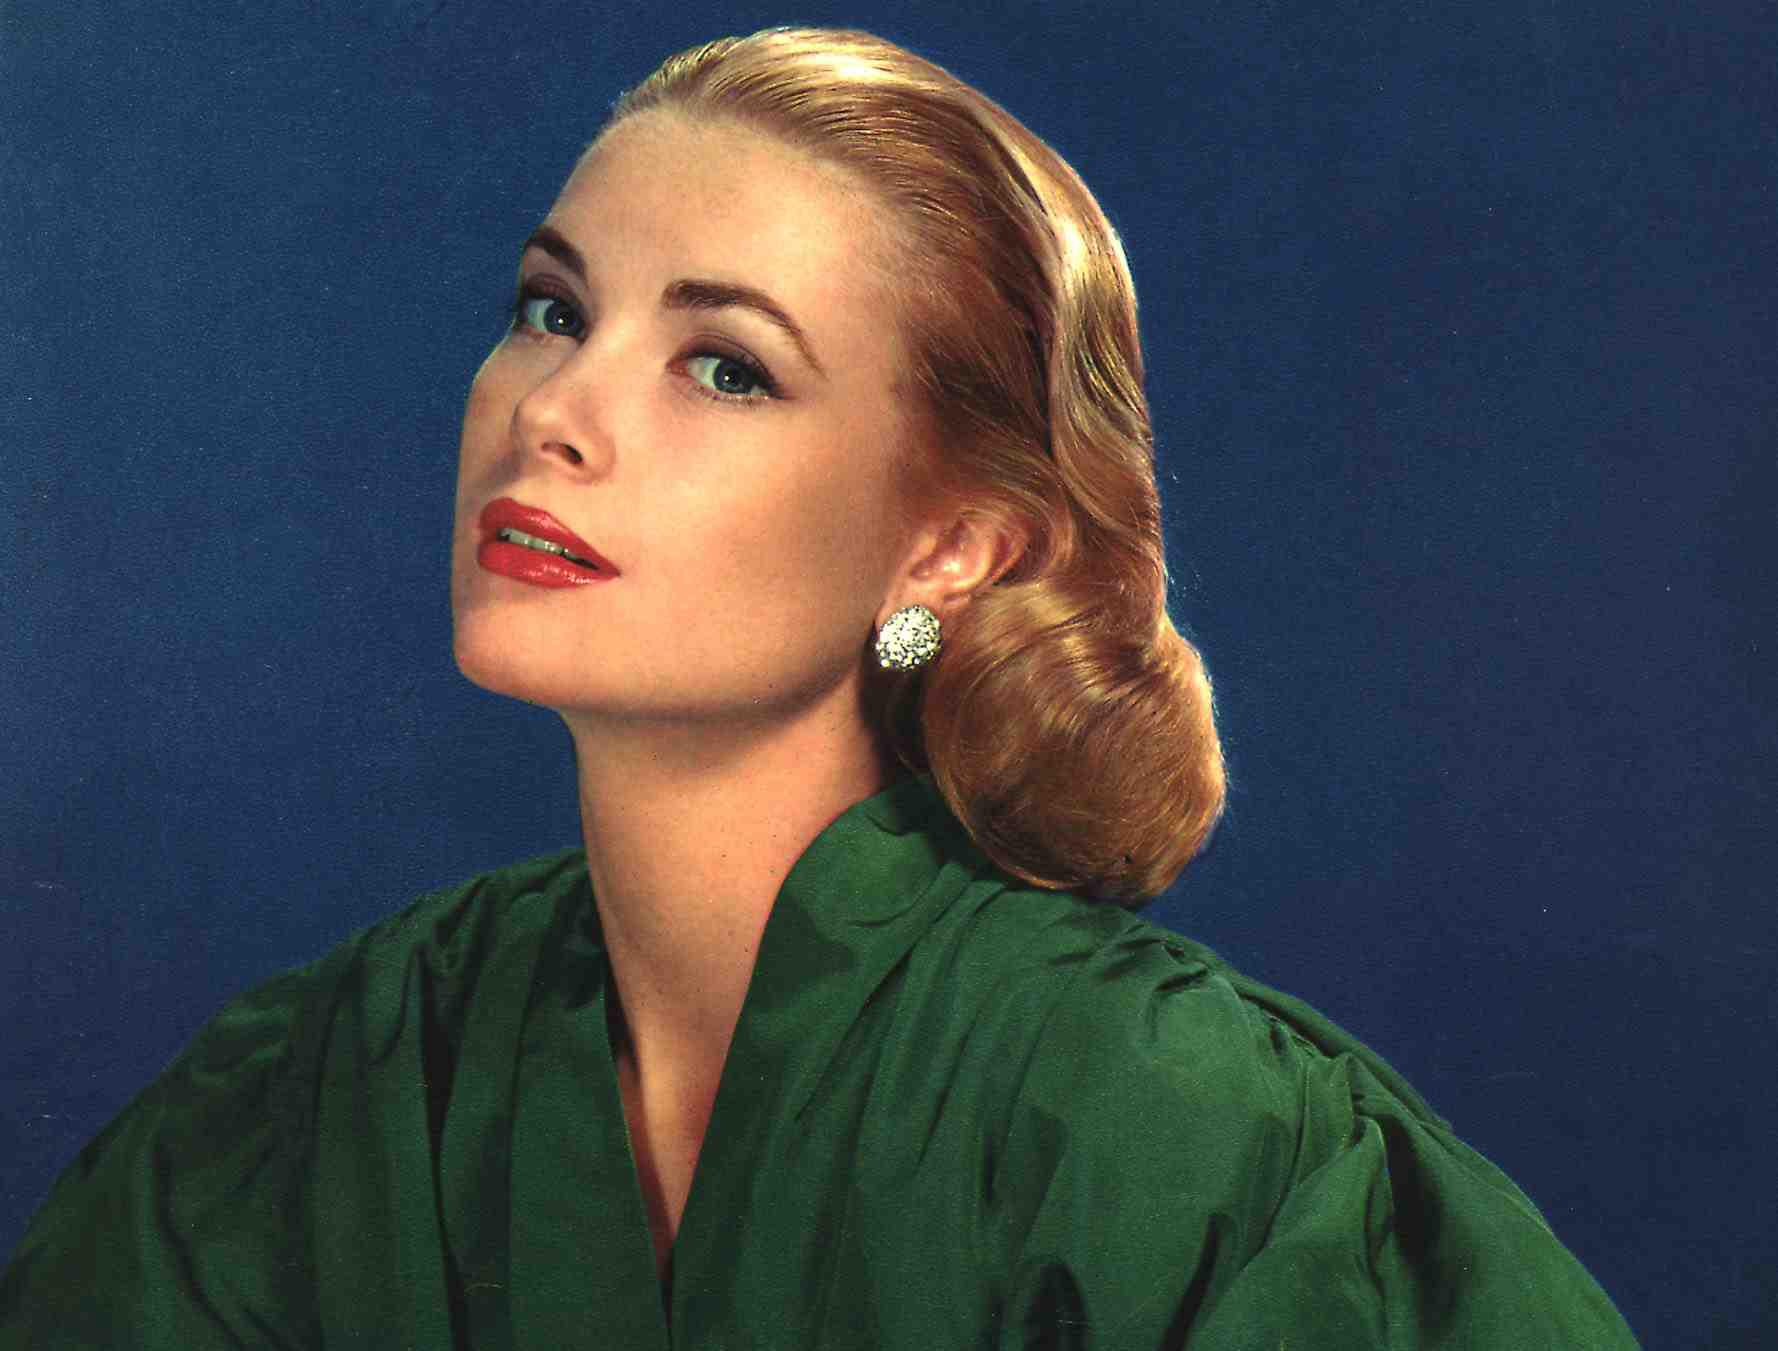 A portrait of Grace Kelly, circa 1956 | Source: Getty Images